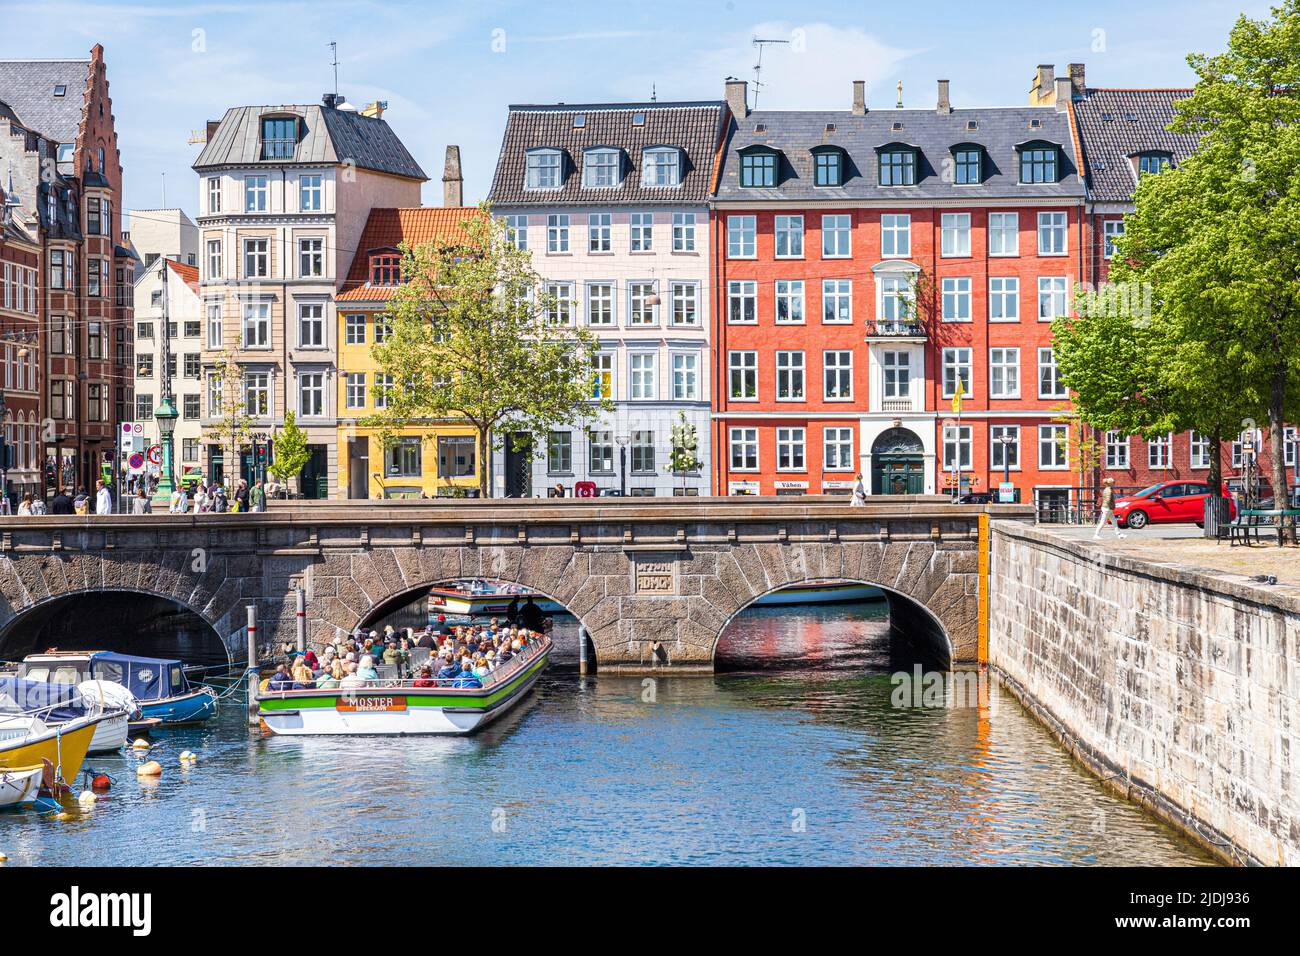 A tourist boat passing under the Stormbro bridge which marks the joining of the Slotsholmen Canal and Frederiksholm Canal in Copenhagen, Denmark. Stock Photo